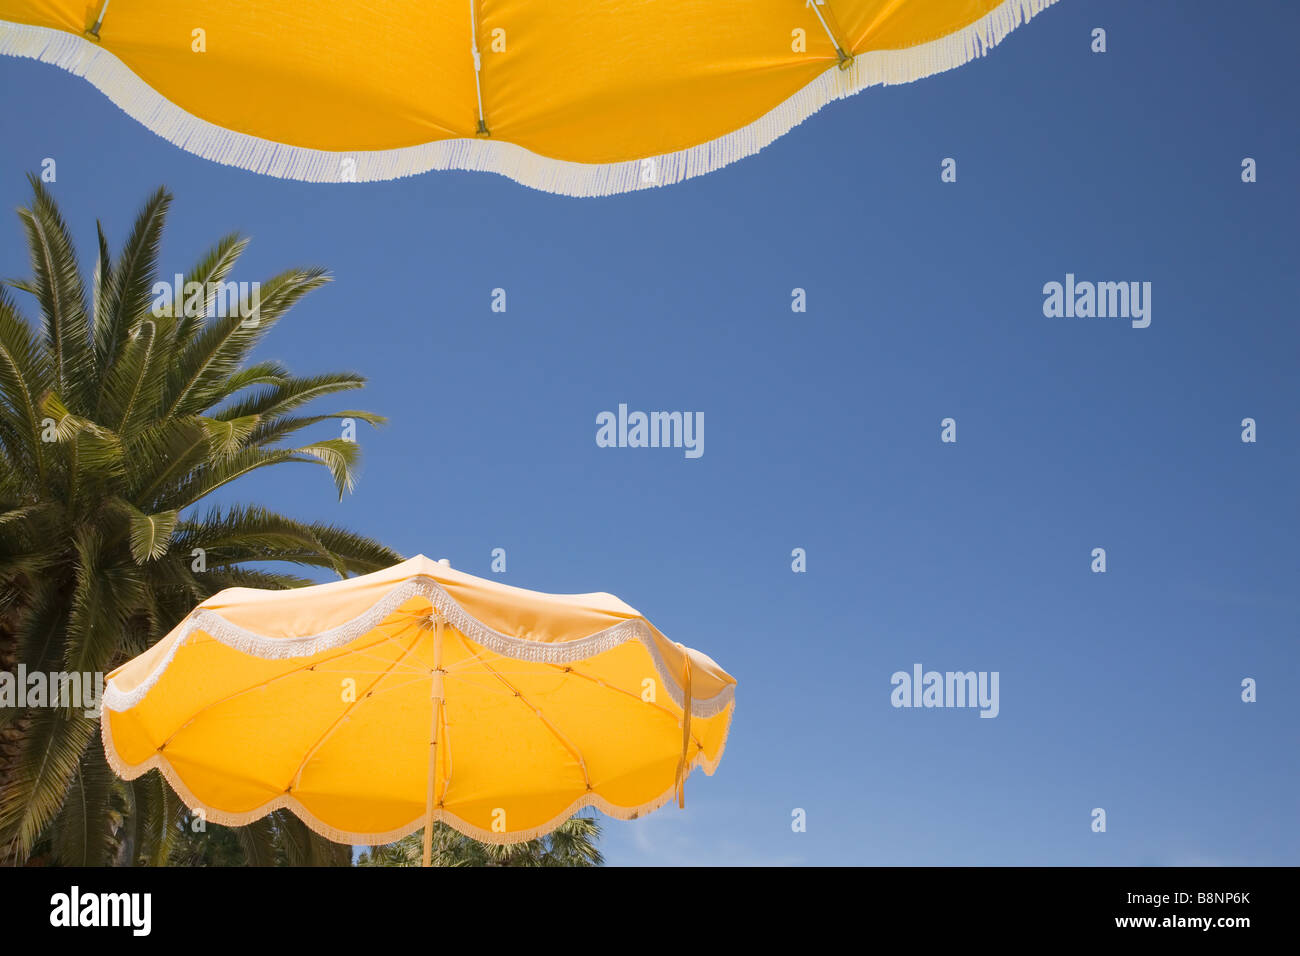 Looking upwards at yellow beach umbrellas with blue sky and palm tree behind. Stock Photo